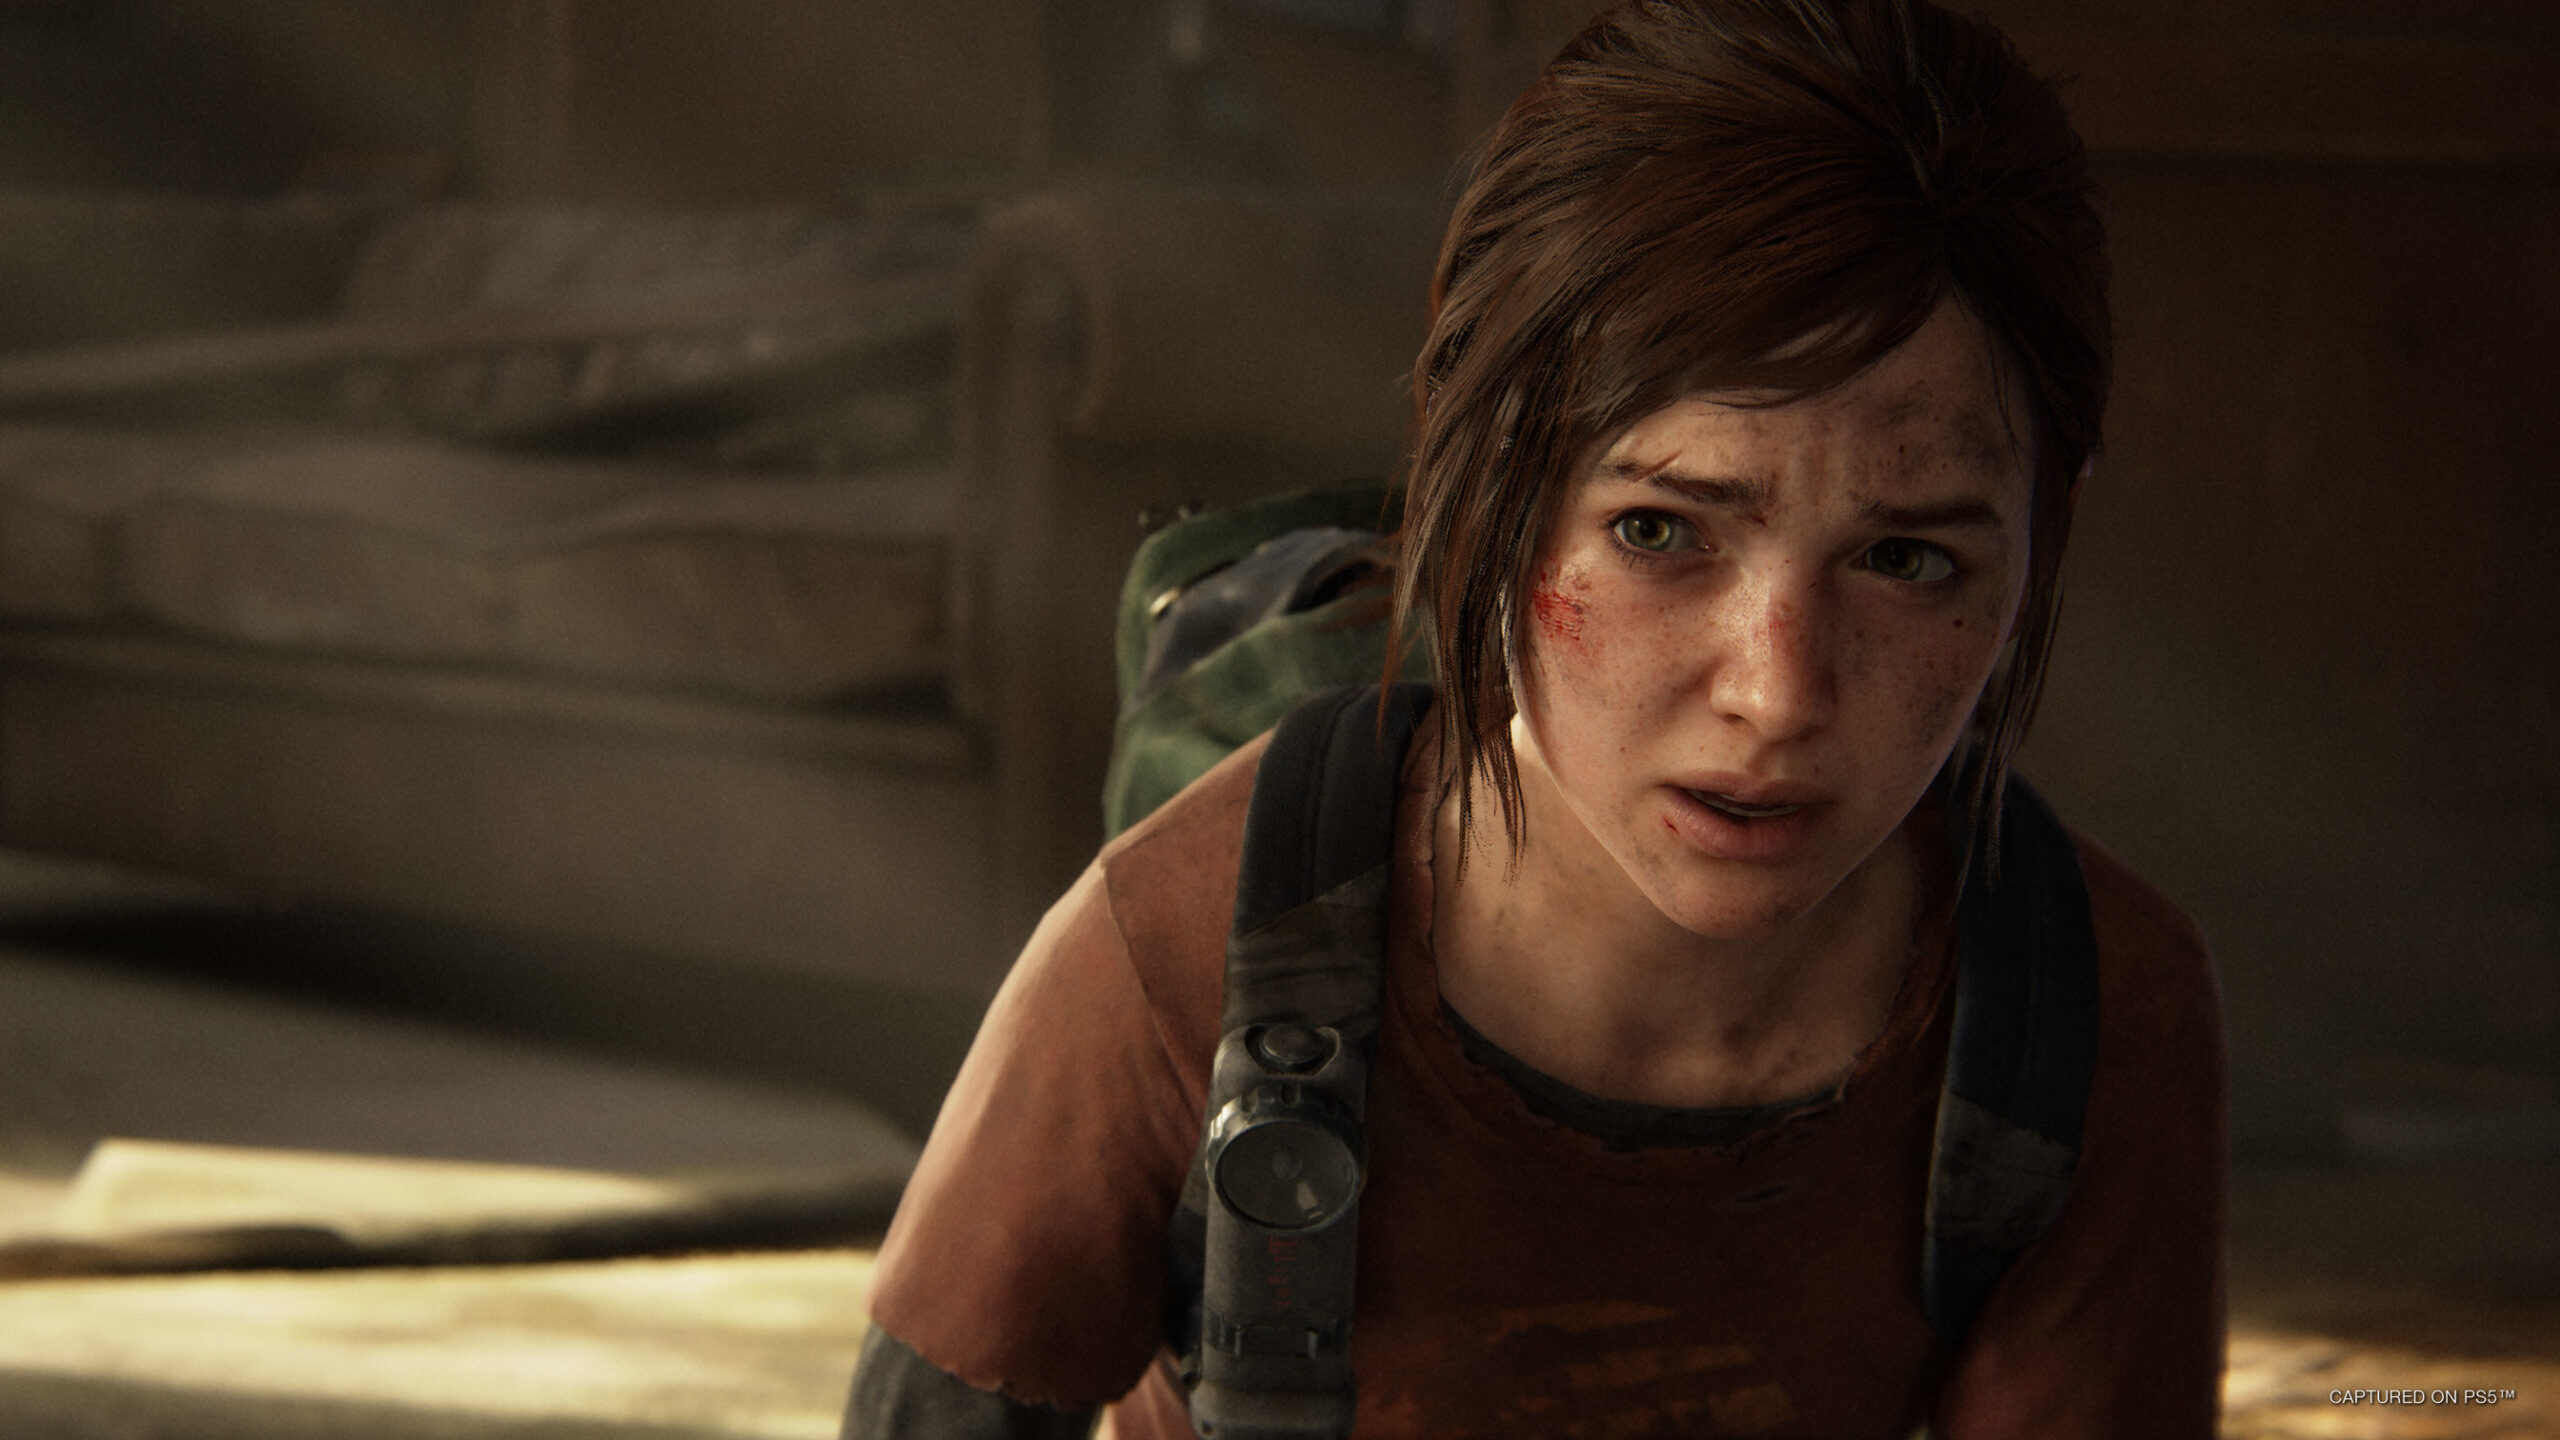 The Last of Us Part 1 Remake May Target 1440p Instead of 4K On PS5